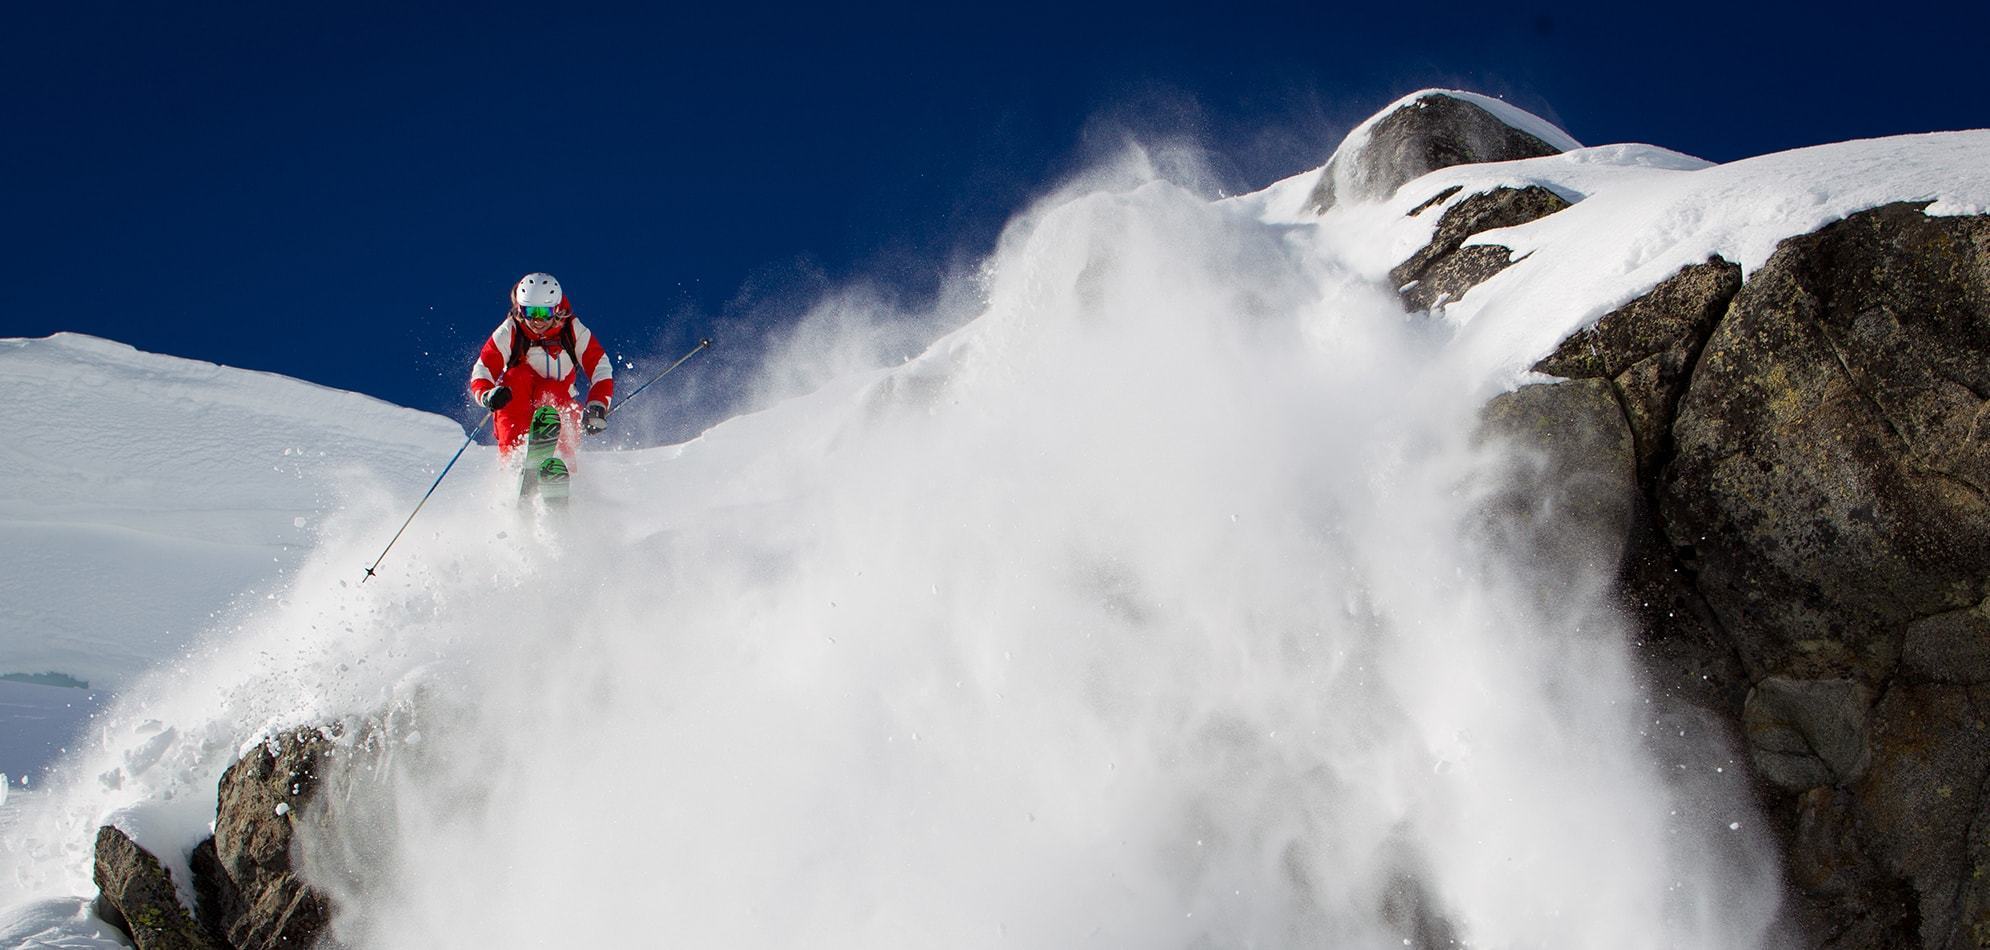 Soul Searcher, Freeride Skiing route in California